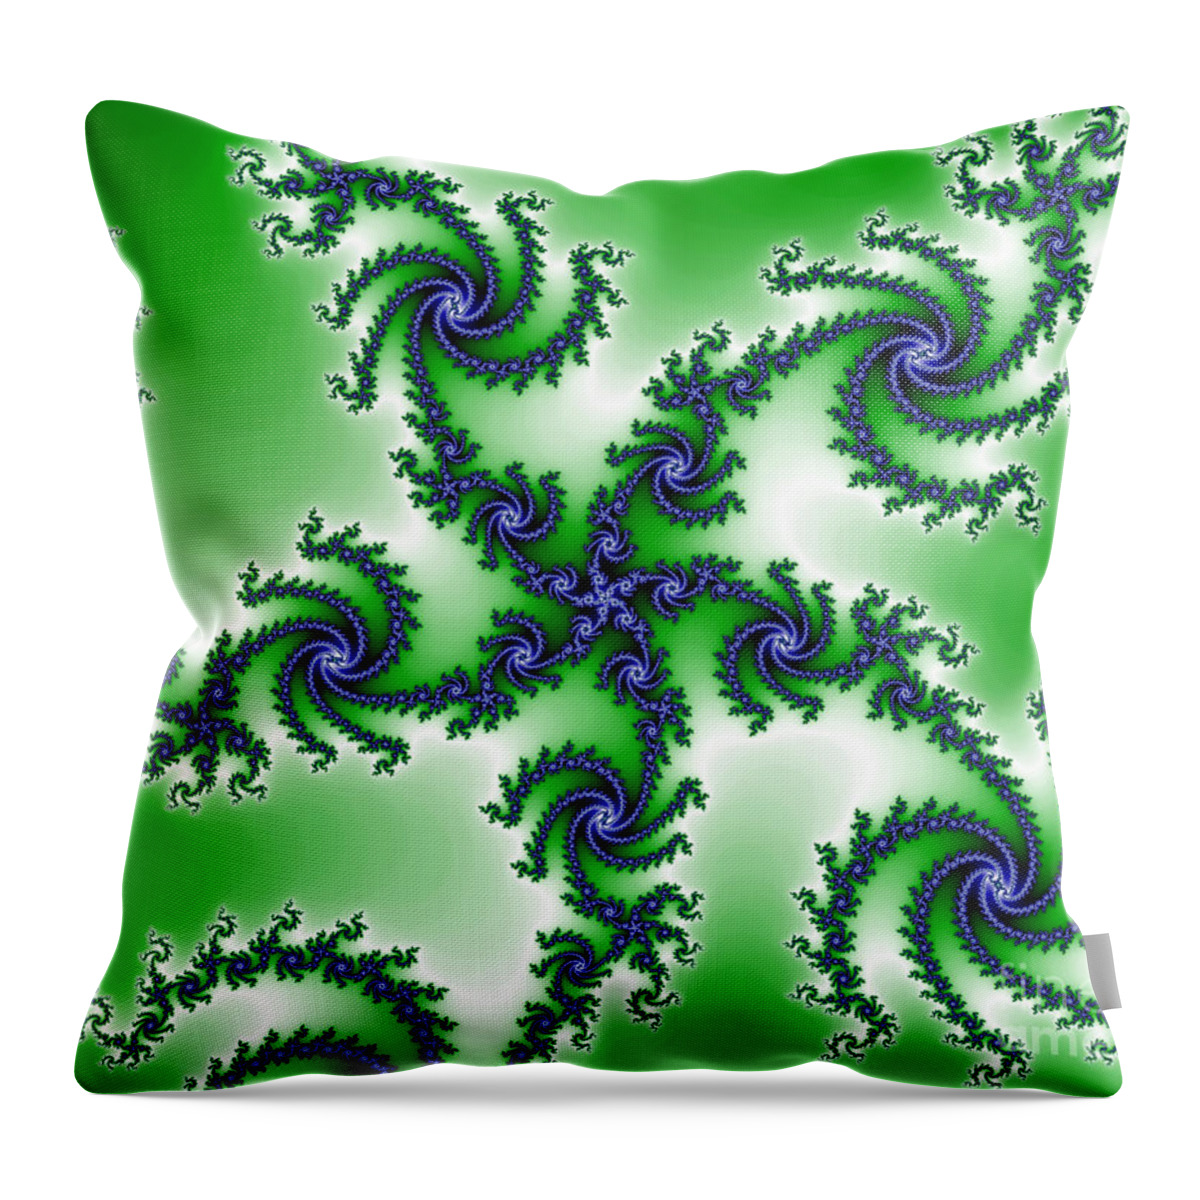 Fractal Throw Pillow featuring the digital art Cosmic Swirls by Robert E Alter Reflections of Infinity